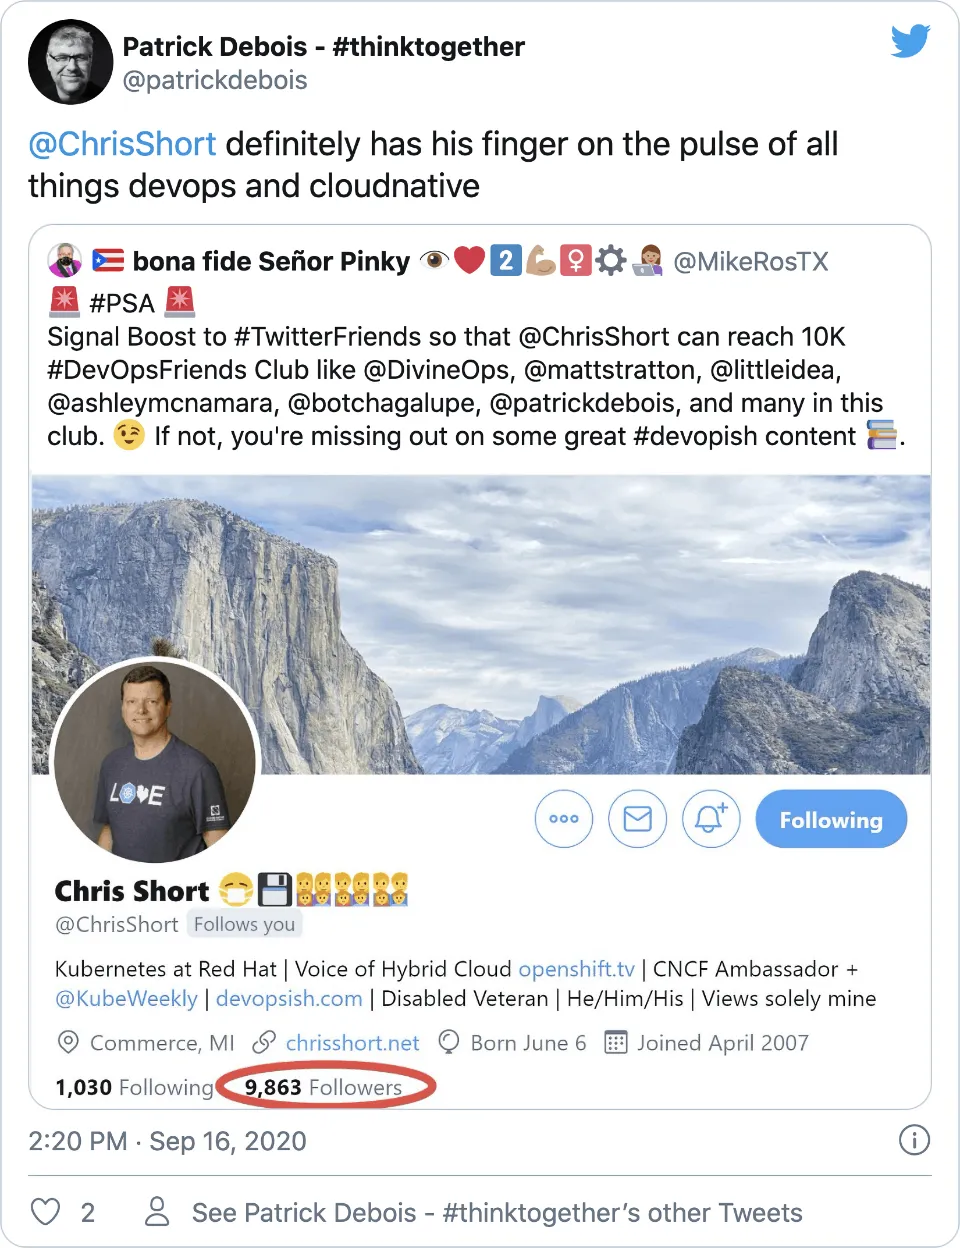 "@ChrisShort definitely has his finger on the pulse of all things devops and cloudnative" —Patrick Debois